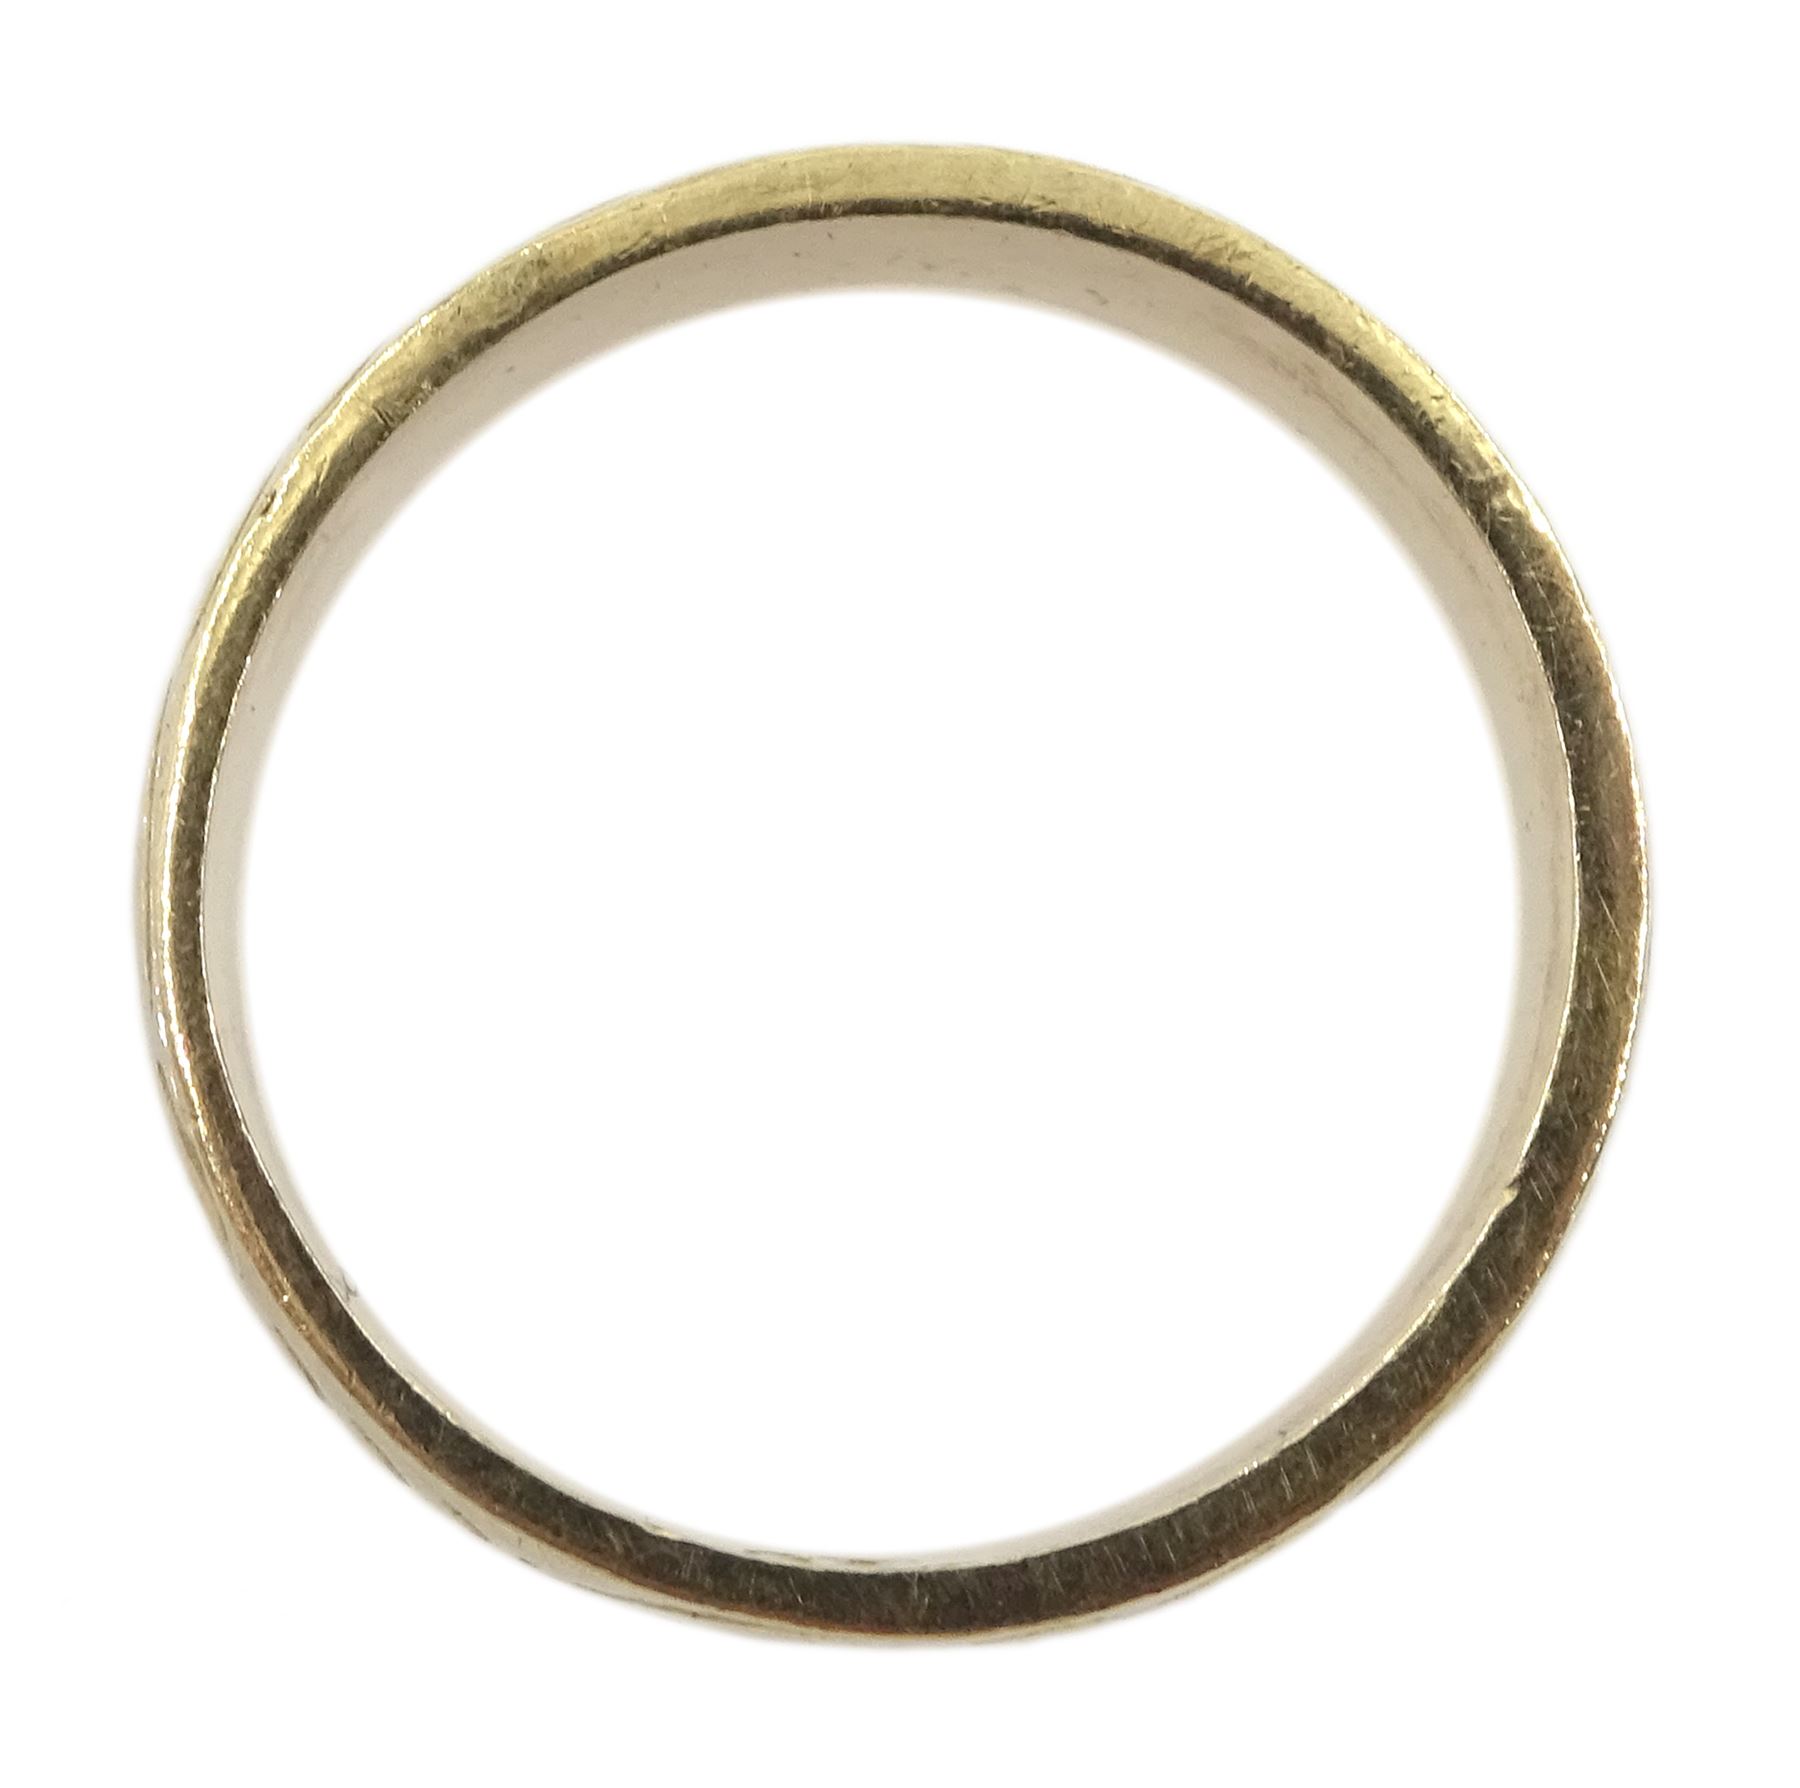 9ct gold ring with engraved decoration - Image 2 of 2